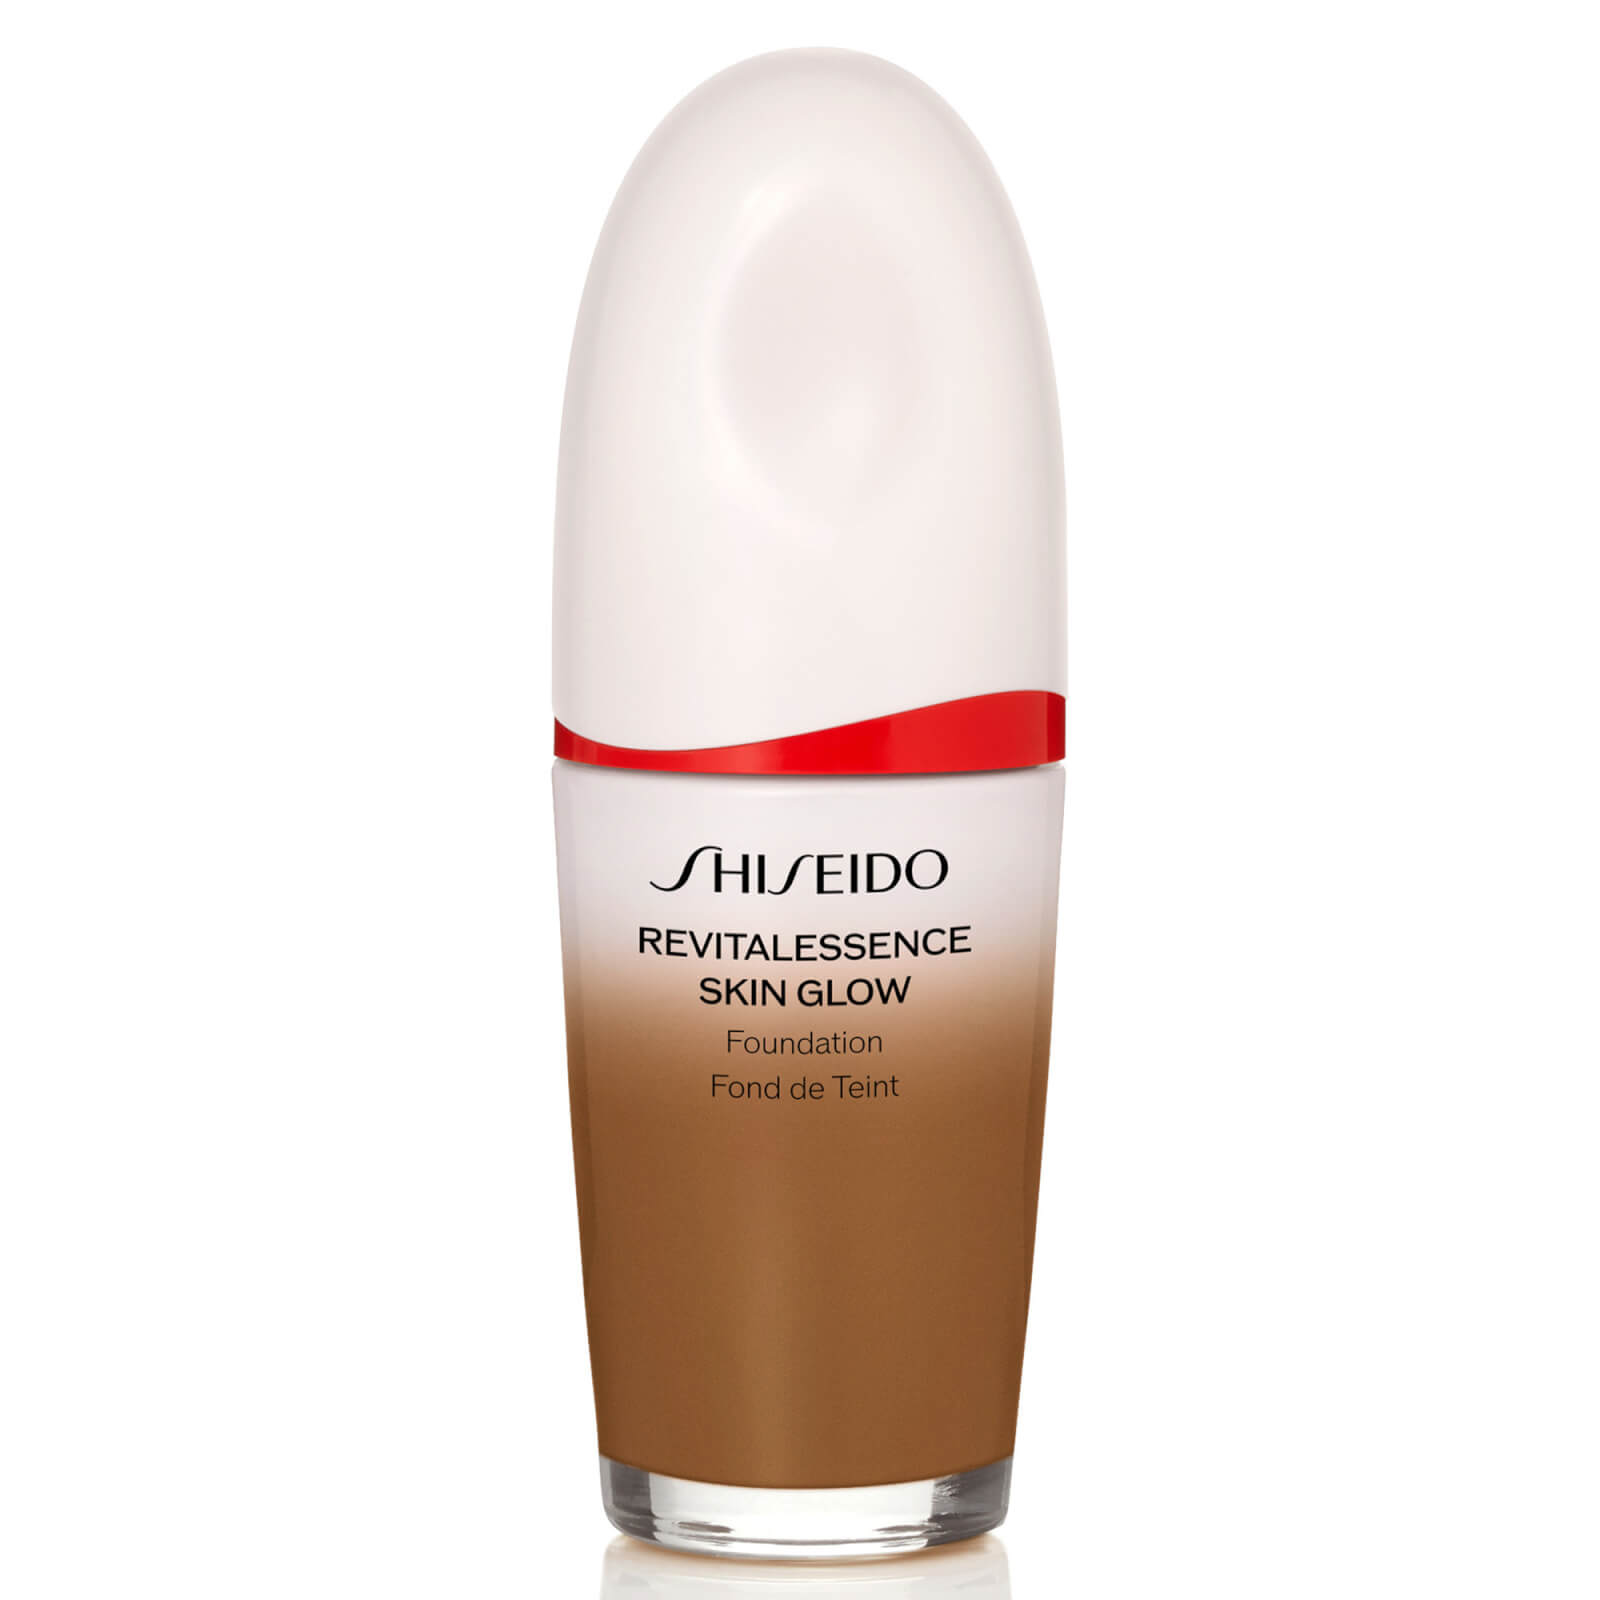 Photos - Foundation & Concealer Shiseido Revitalessence Glow Foundation 30ml  - 510 Suede (Various Shades)